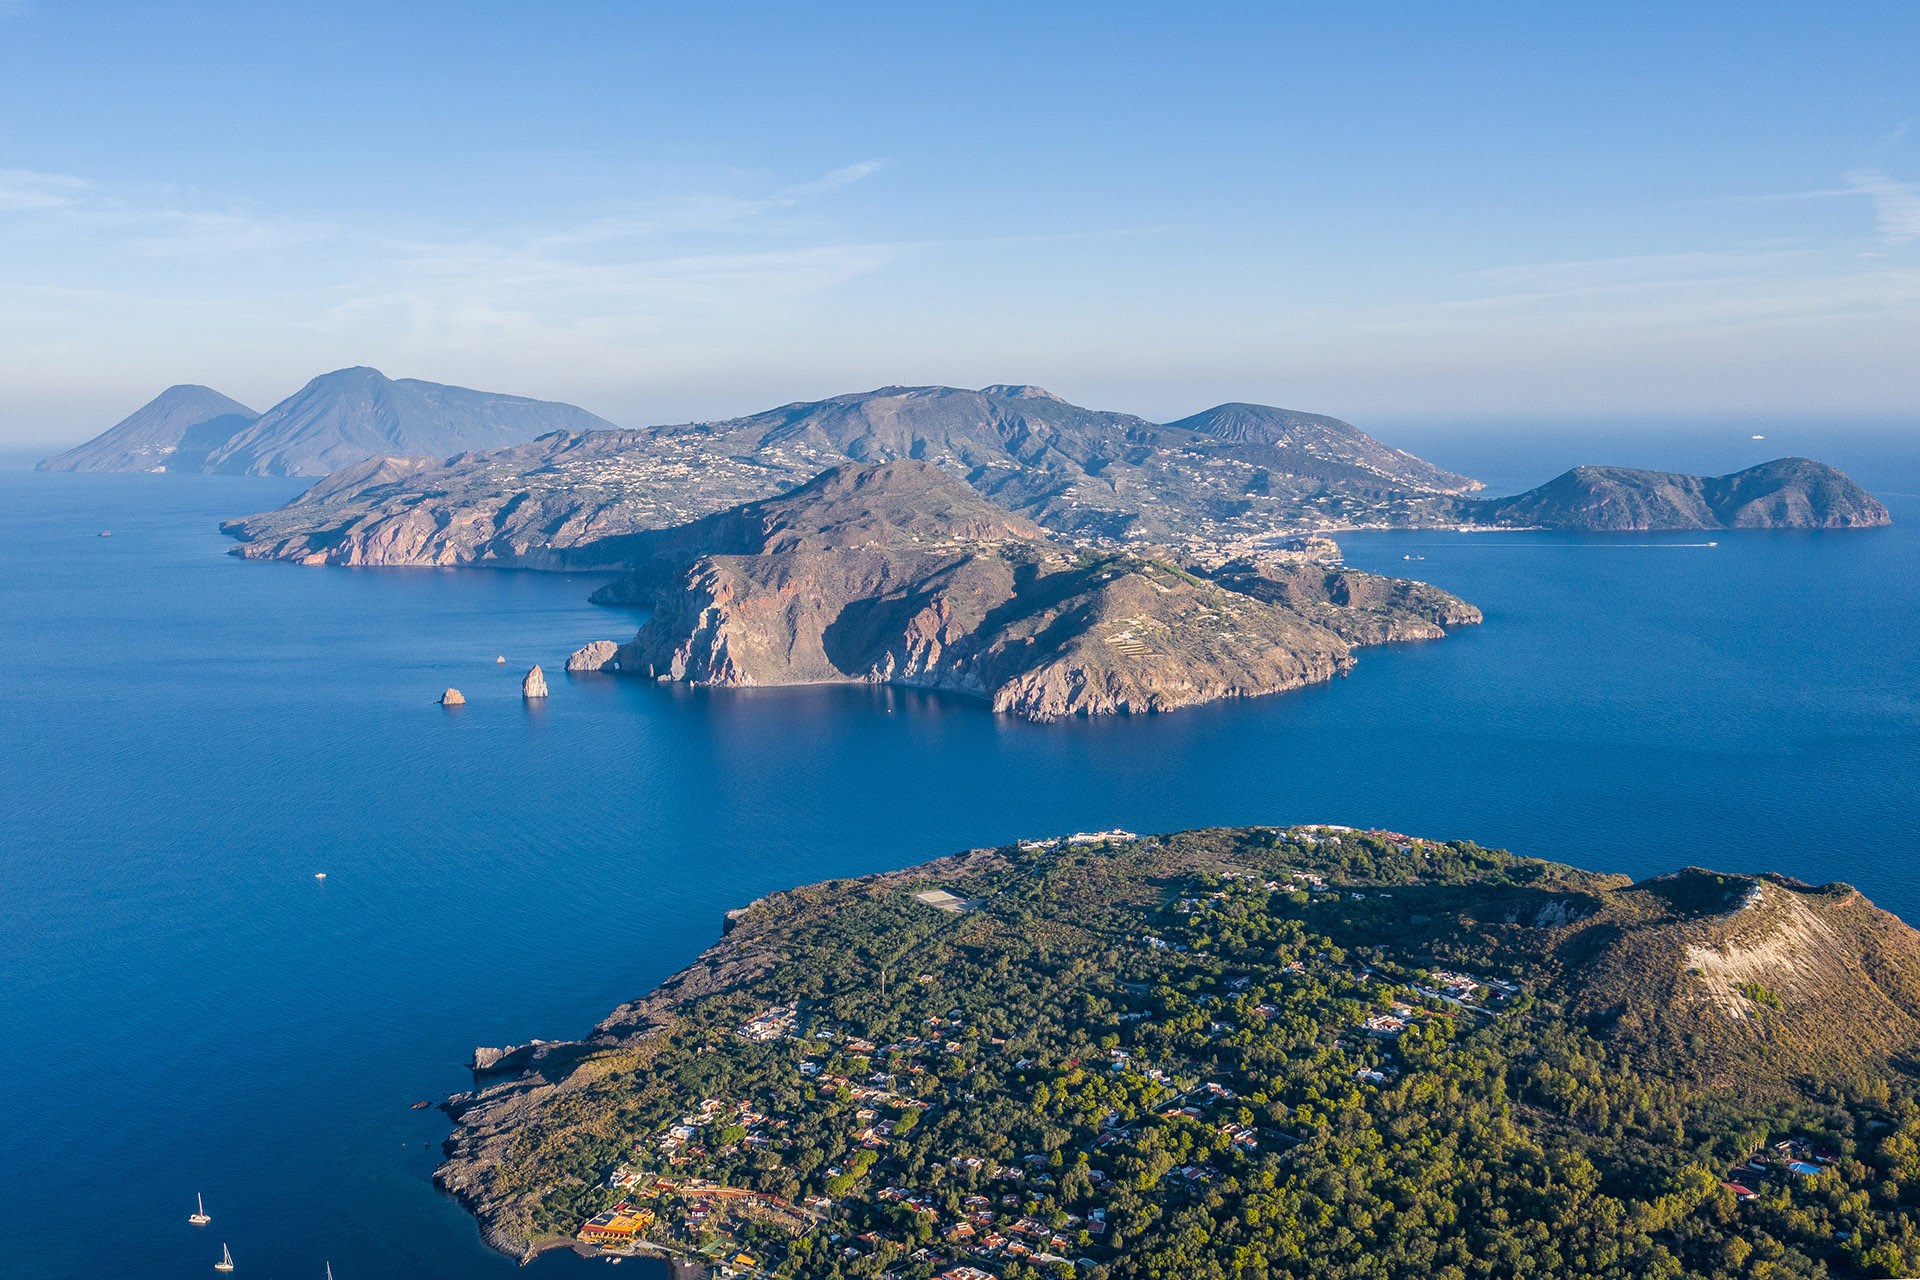 Enjoy Sicilian solitude: Our guide to the Aeolian Islands